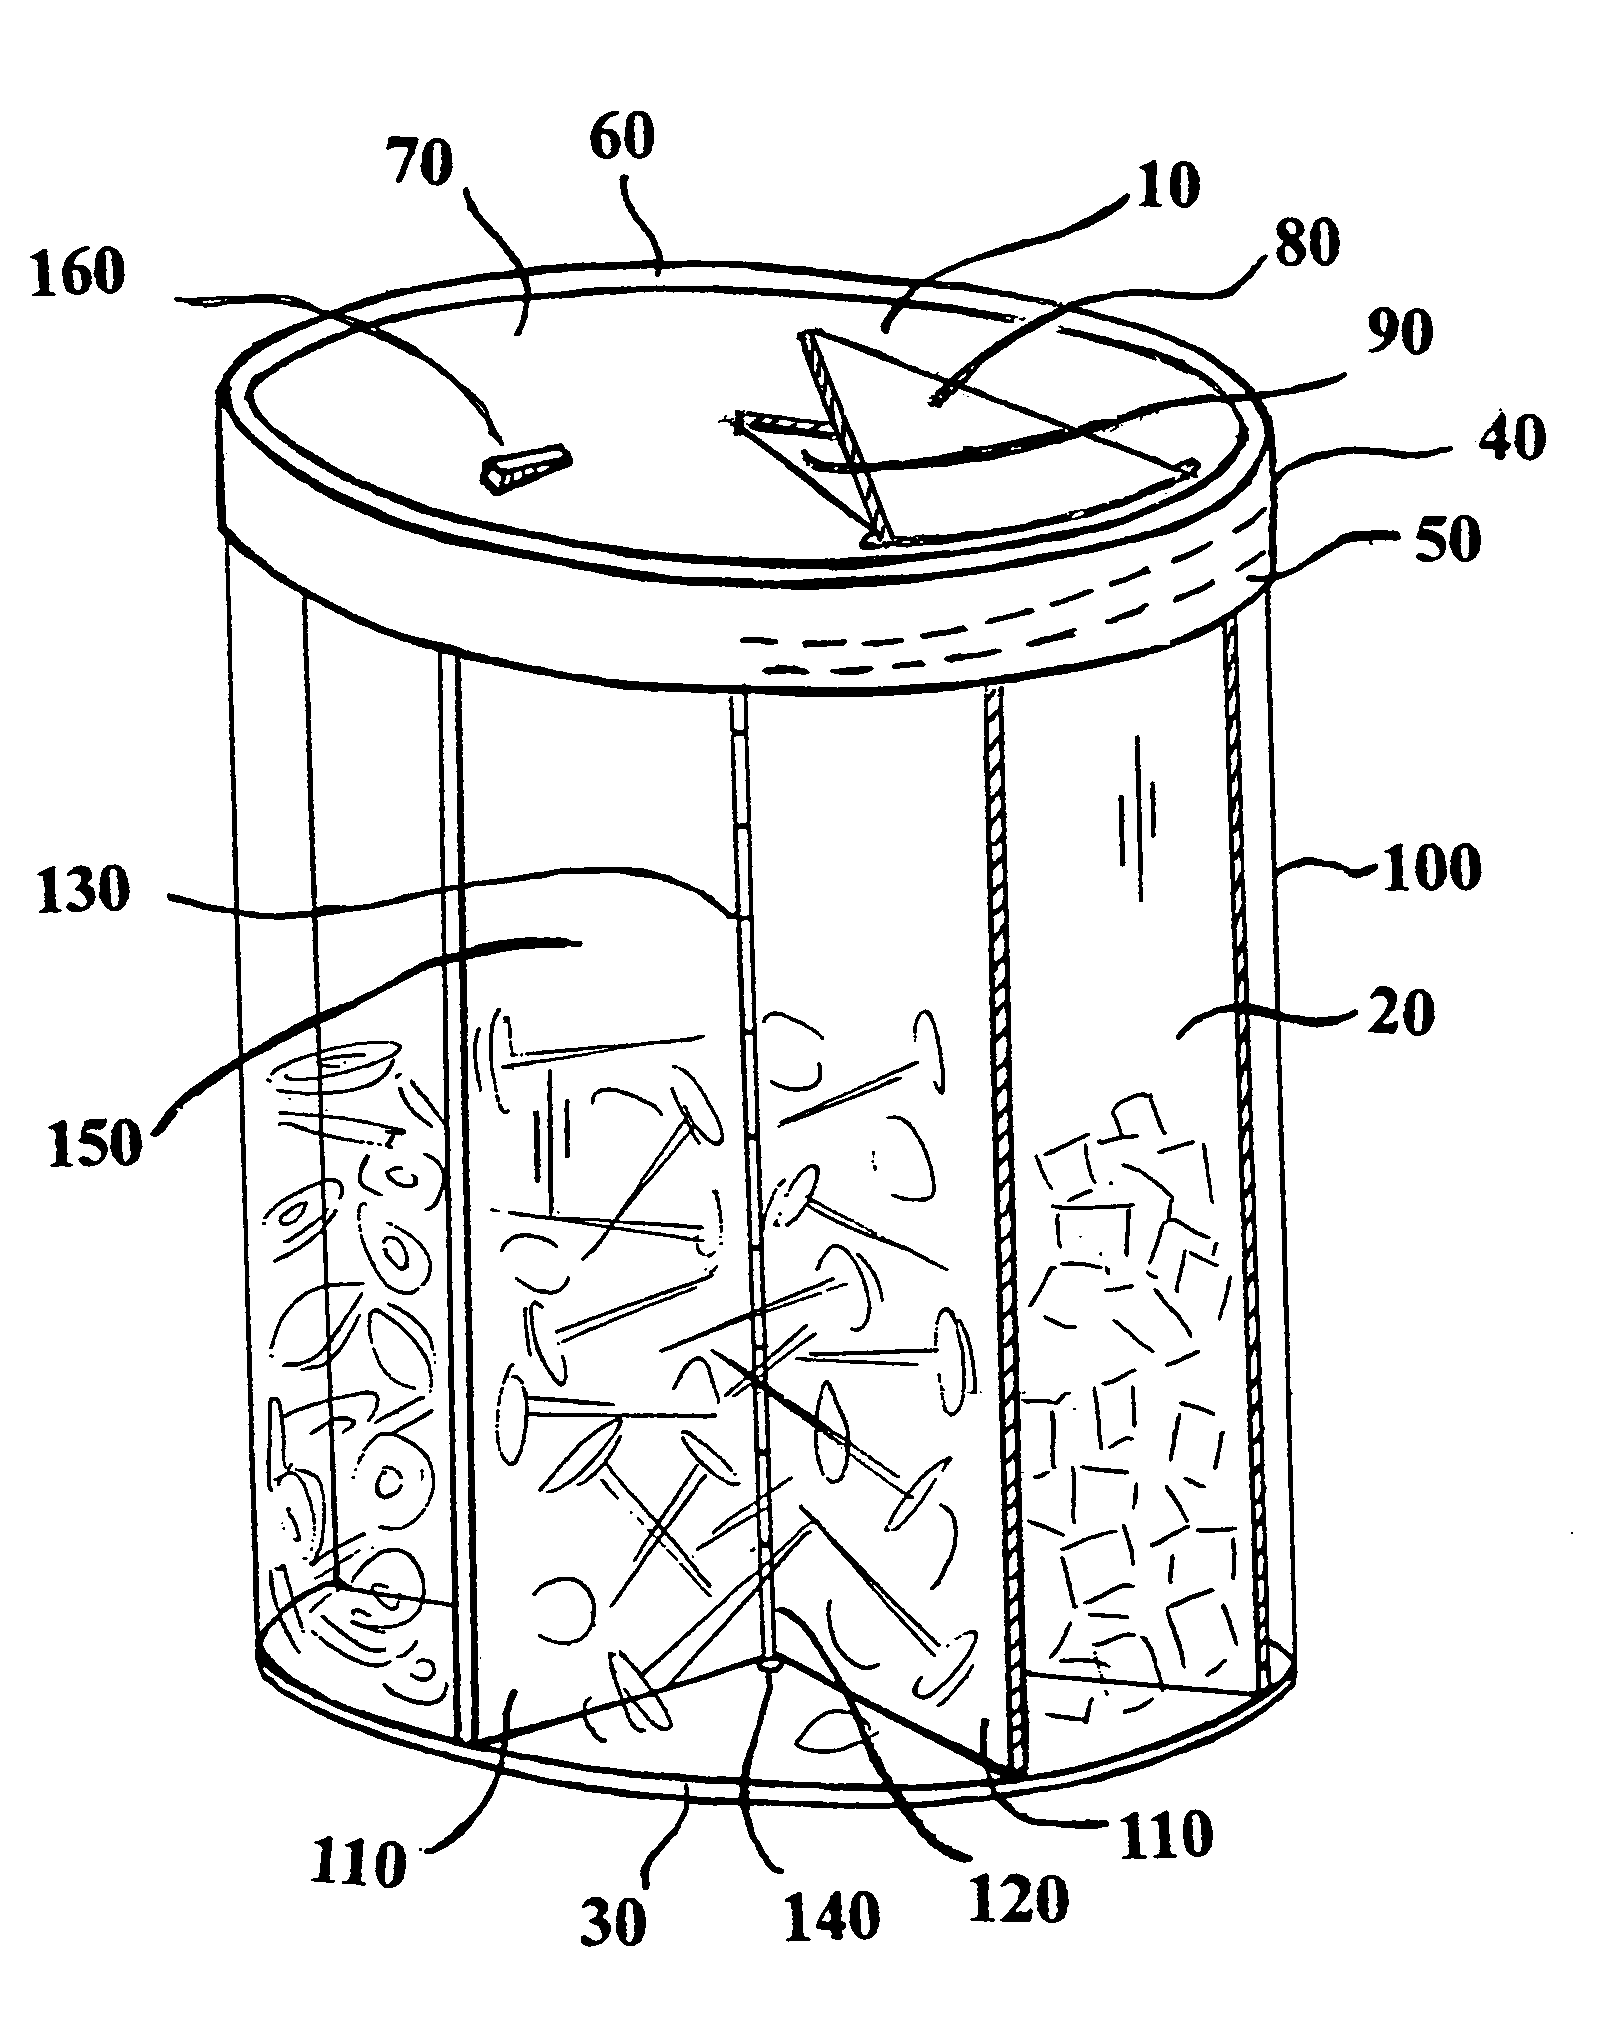 Self-adjusting container